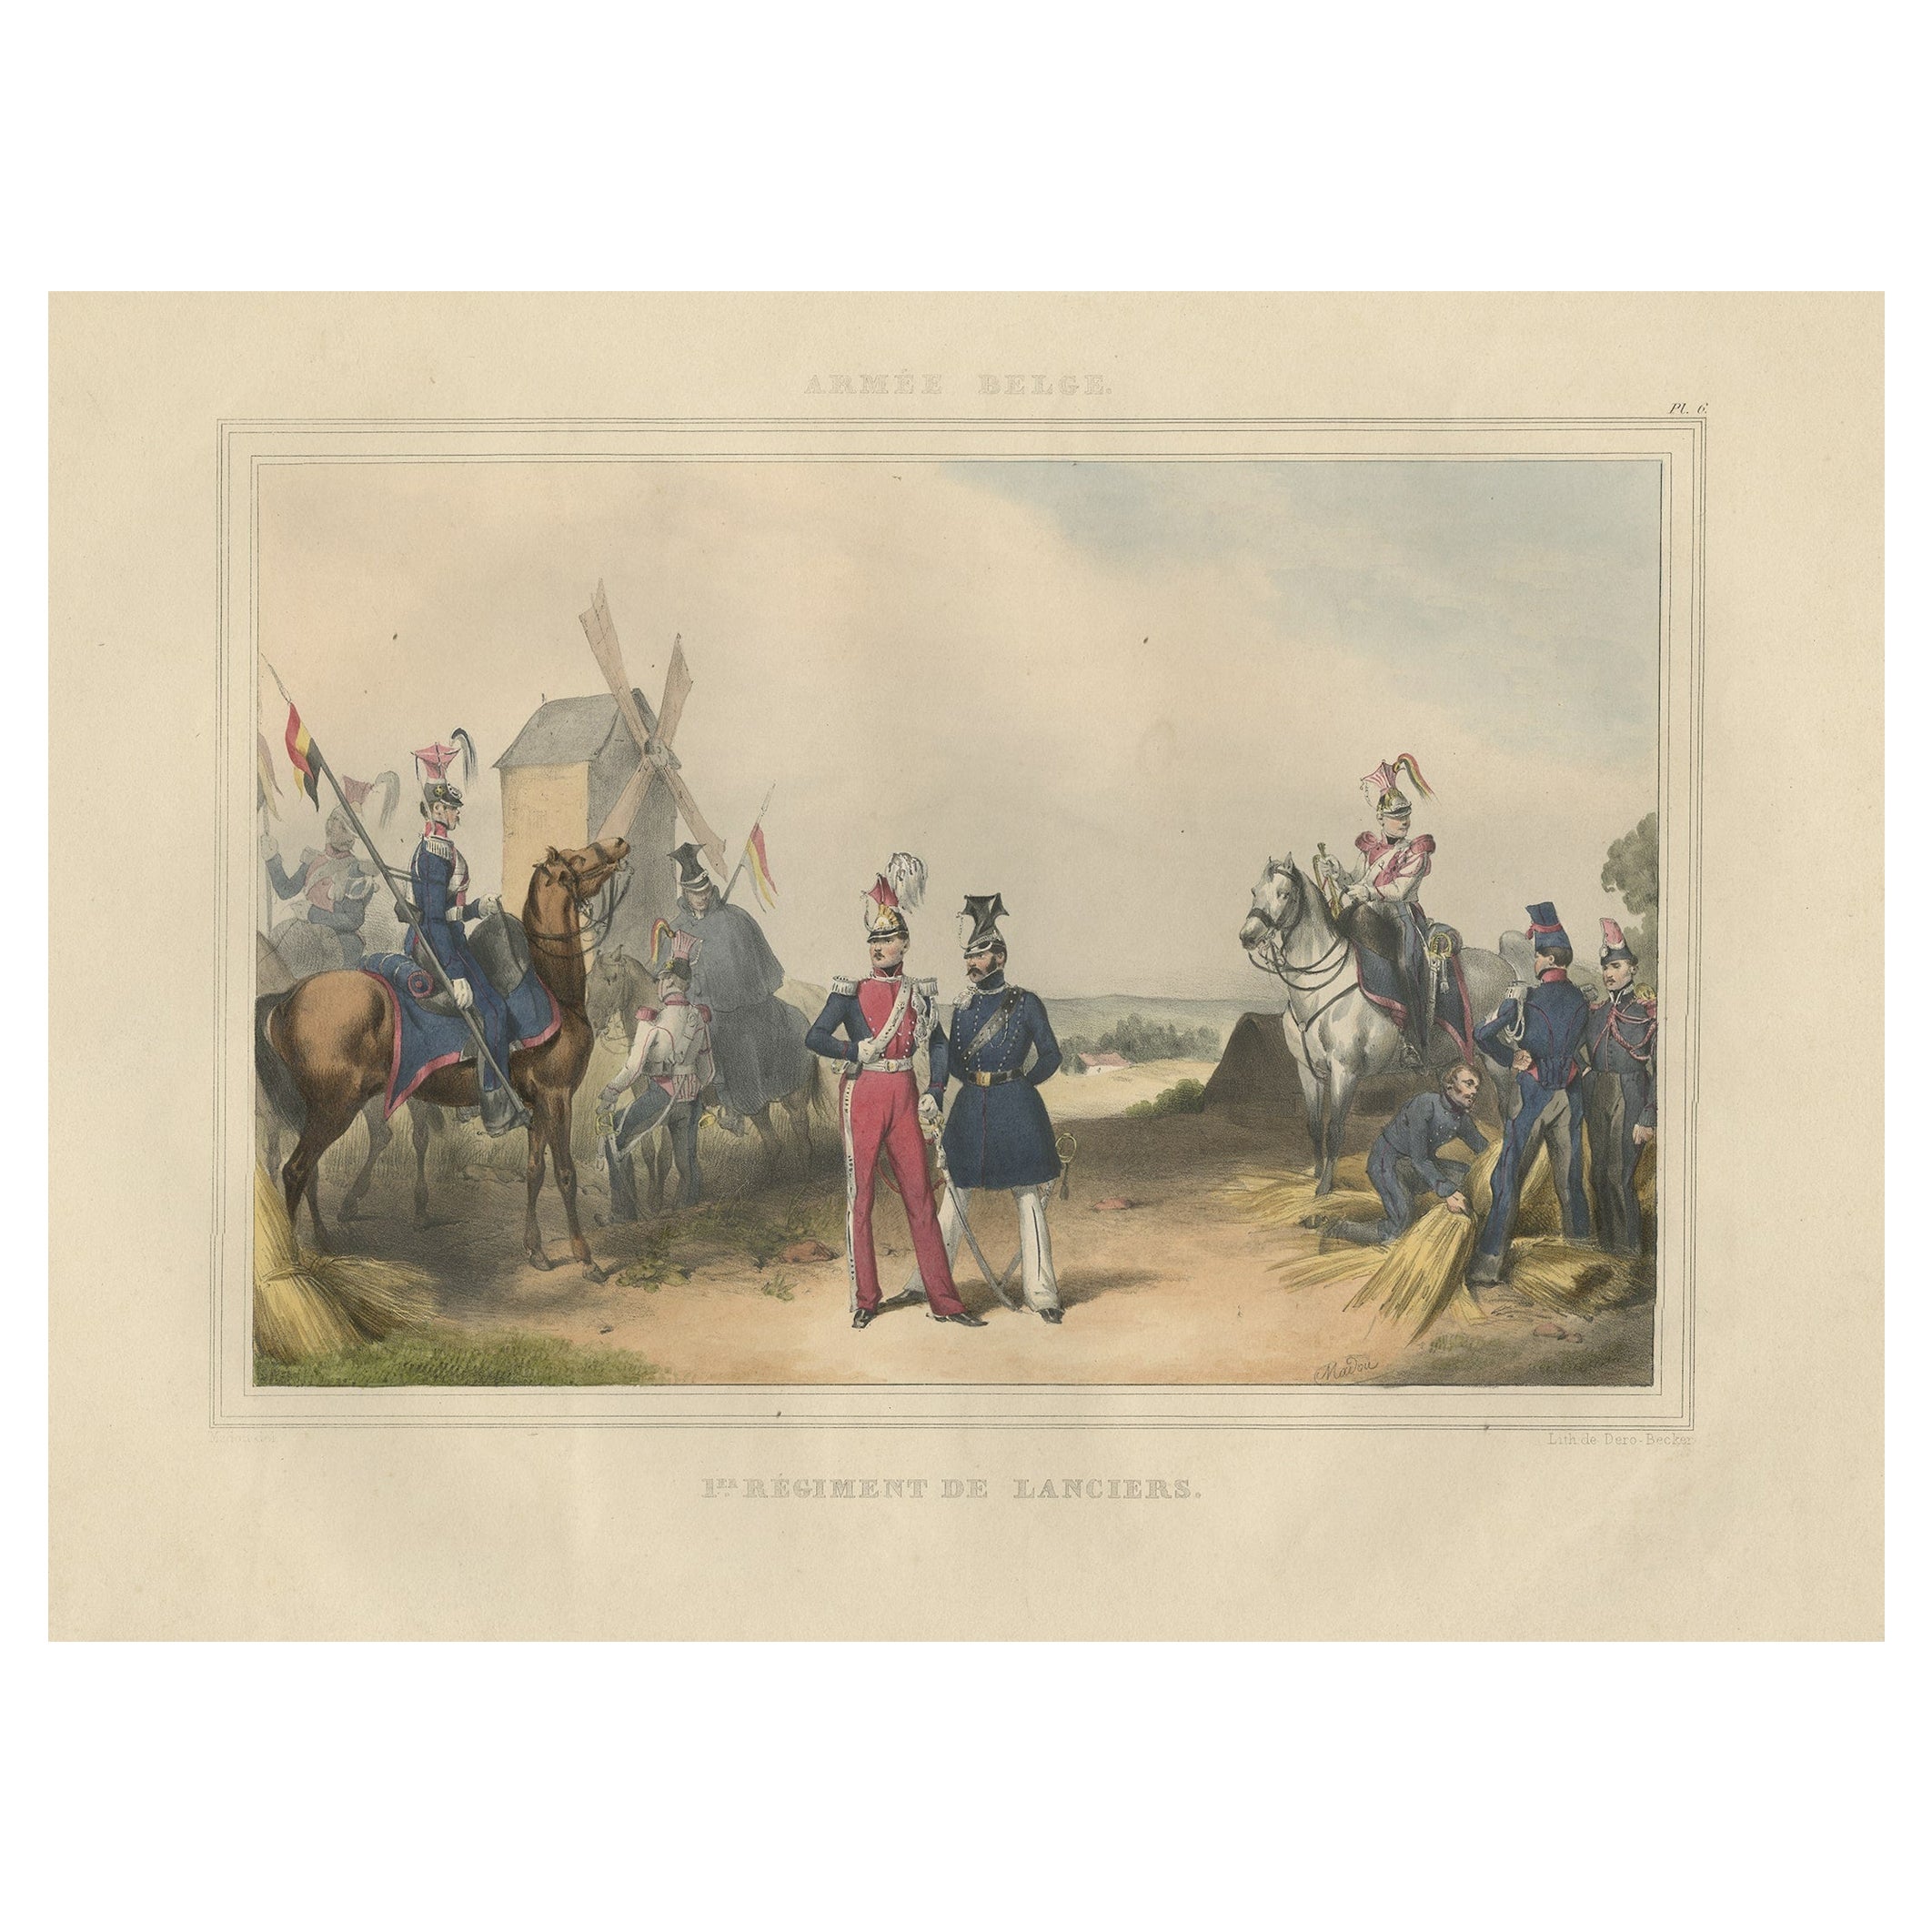 Rare Hand-Colored Print of a Belgium Army Regiment Near a Windmill, 1833